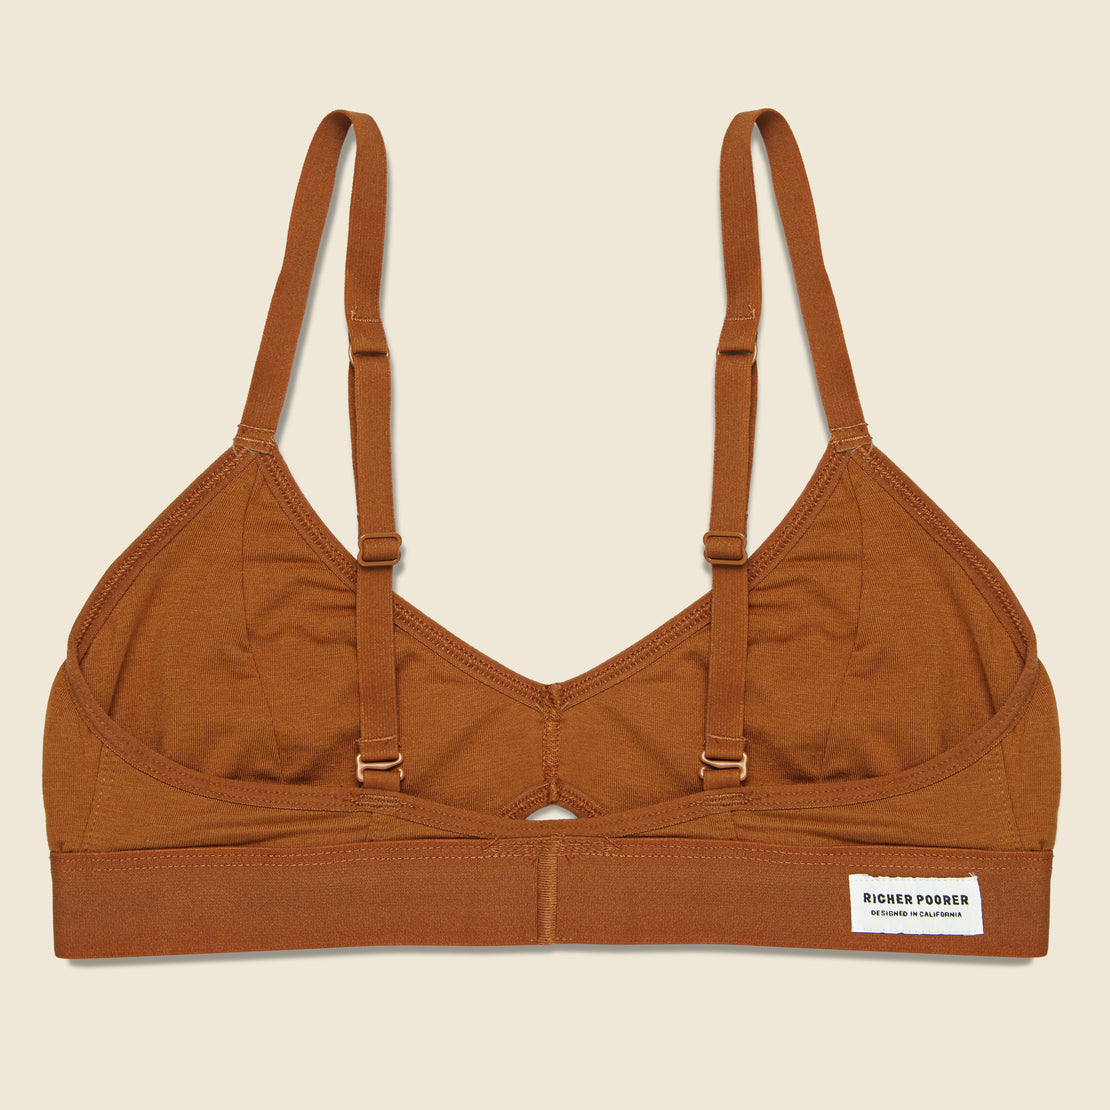 Cutout Bralette - Tobacco - Richer Poorer - STAG Provisions - W - Tops - Sleeveless